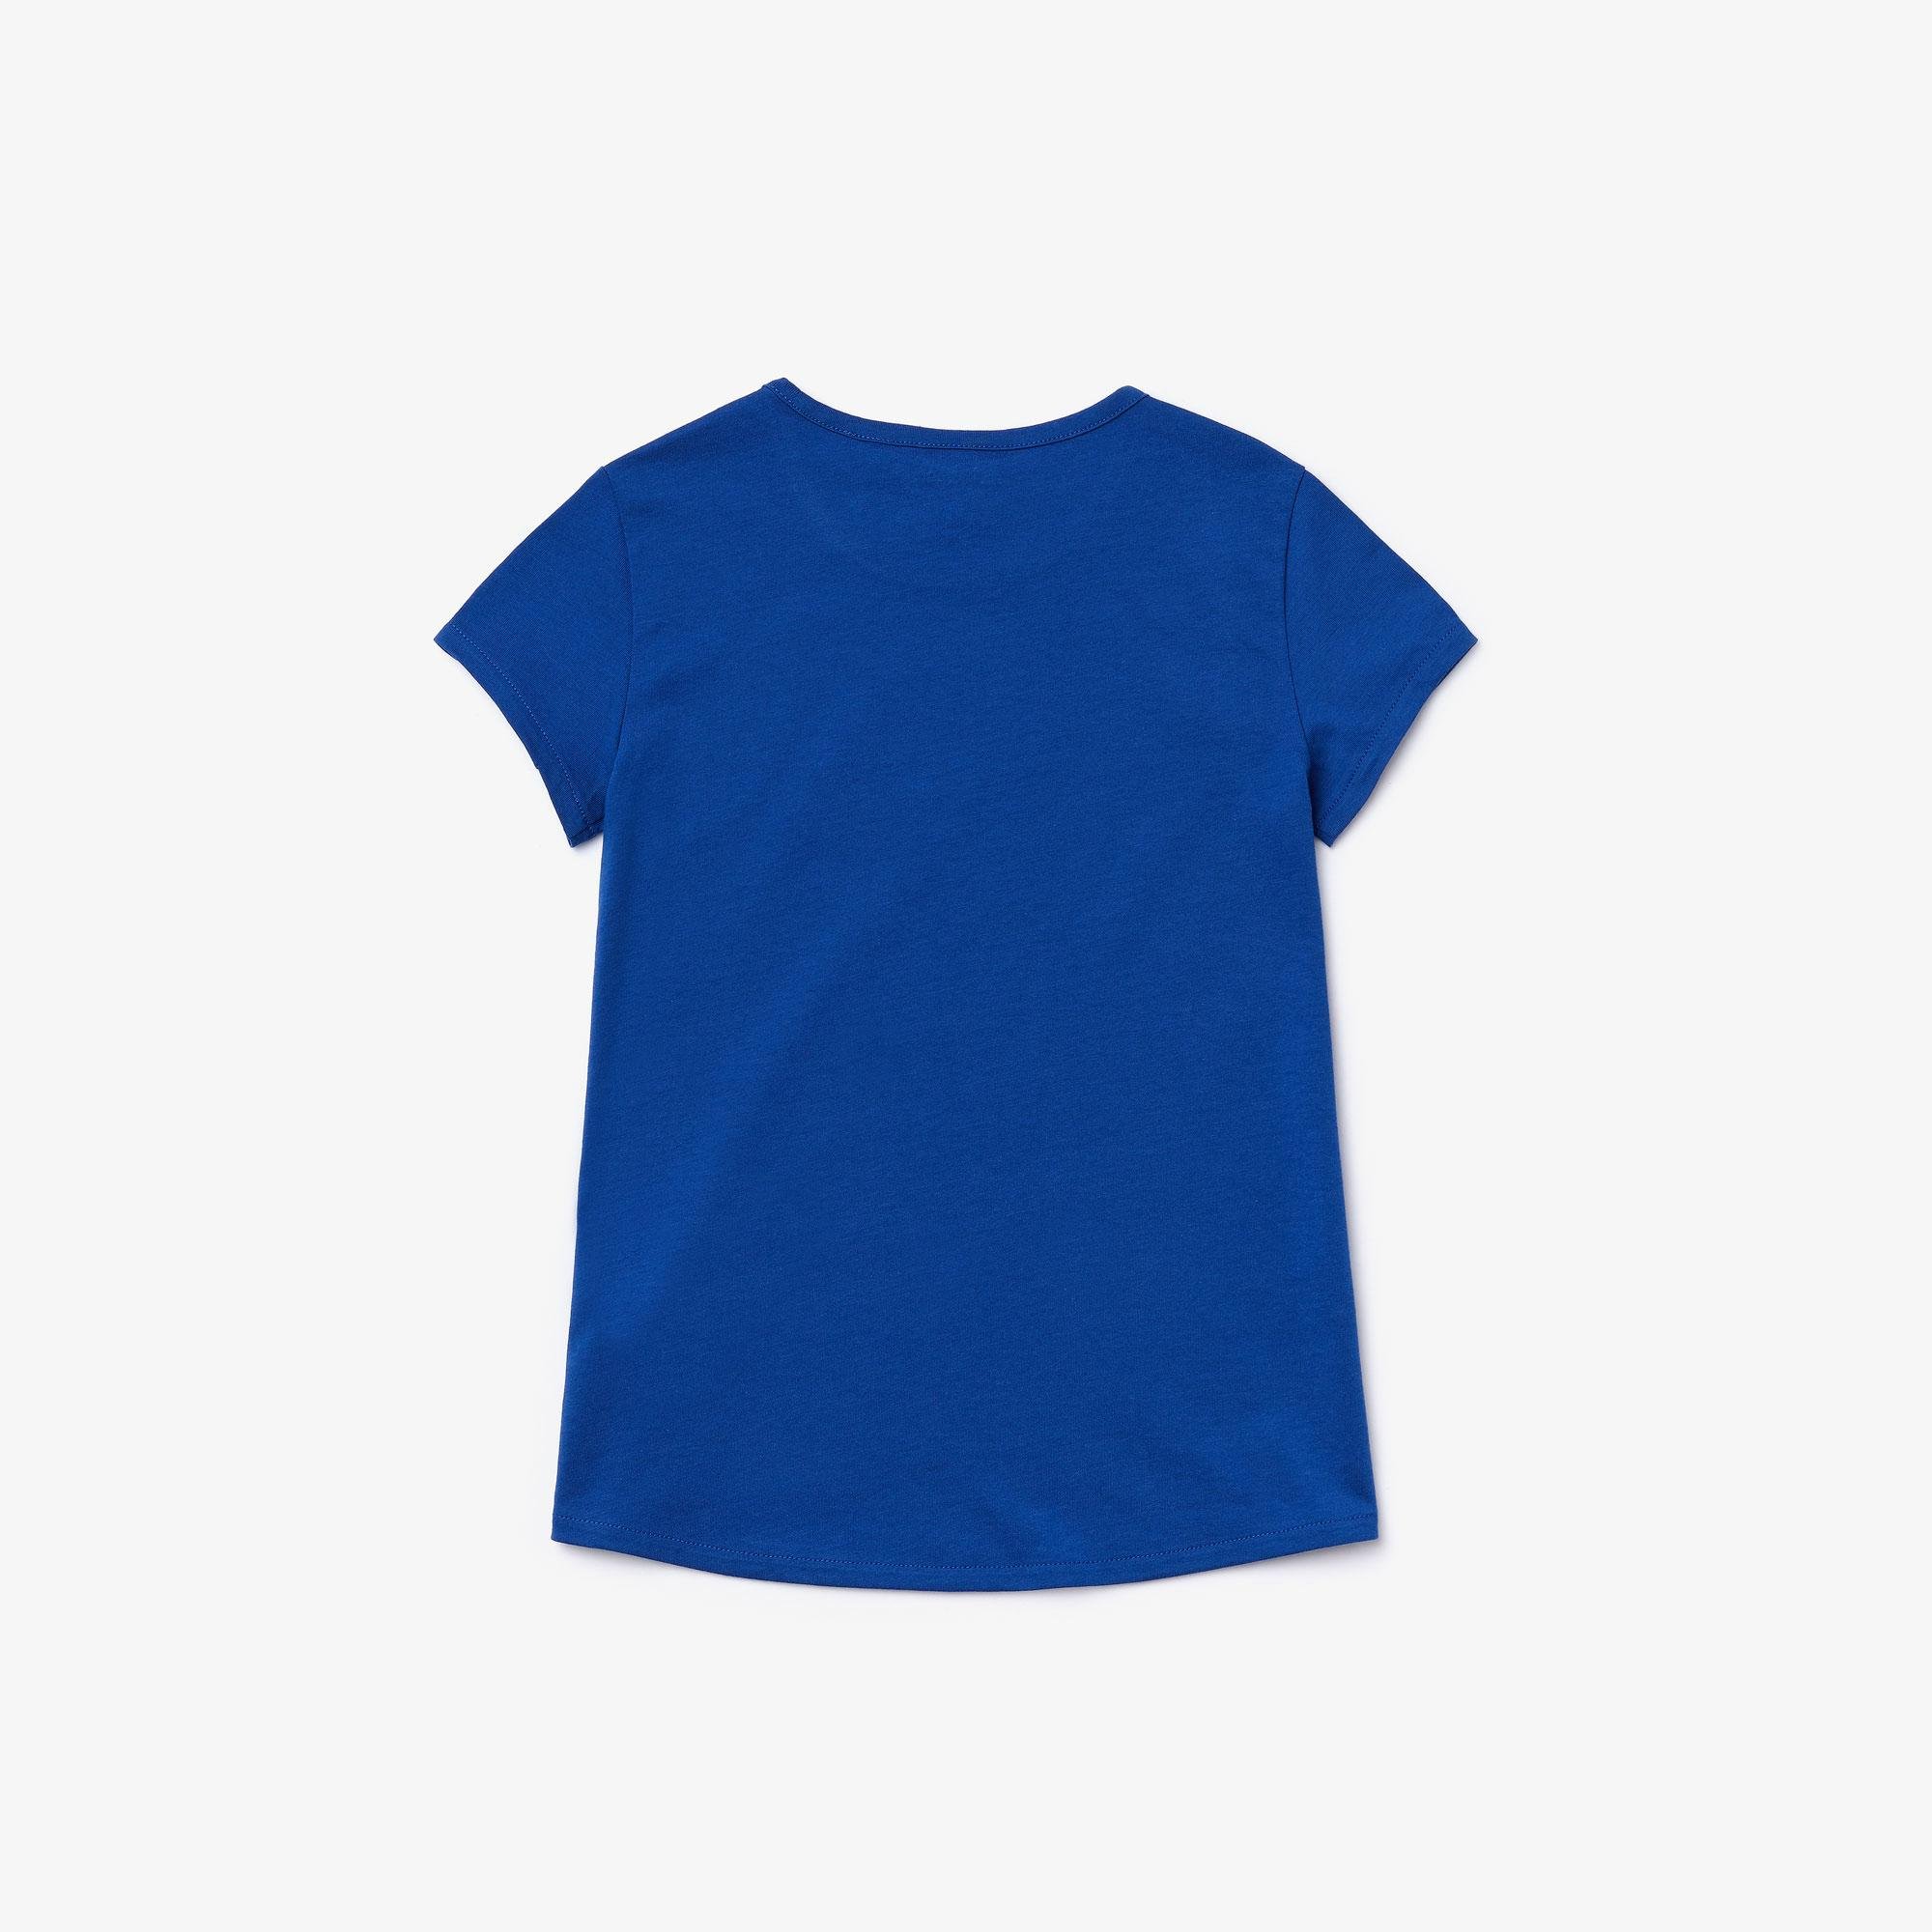 Lacoste Girl's Printed Cotton Crew Neck T-Shirt